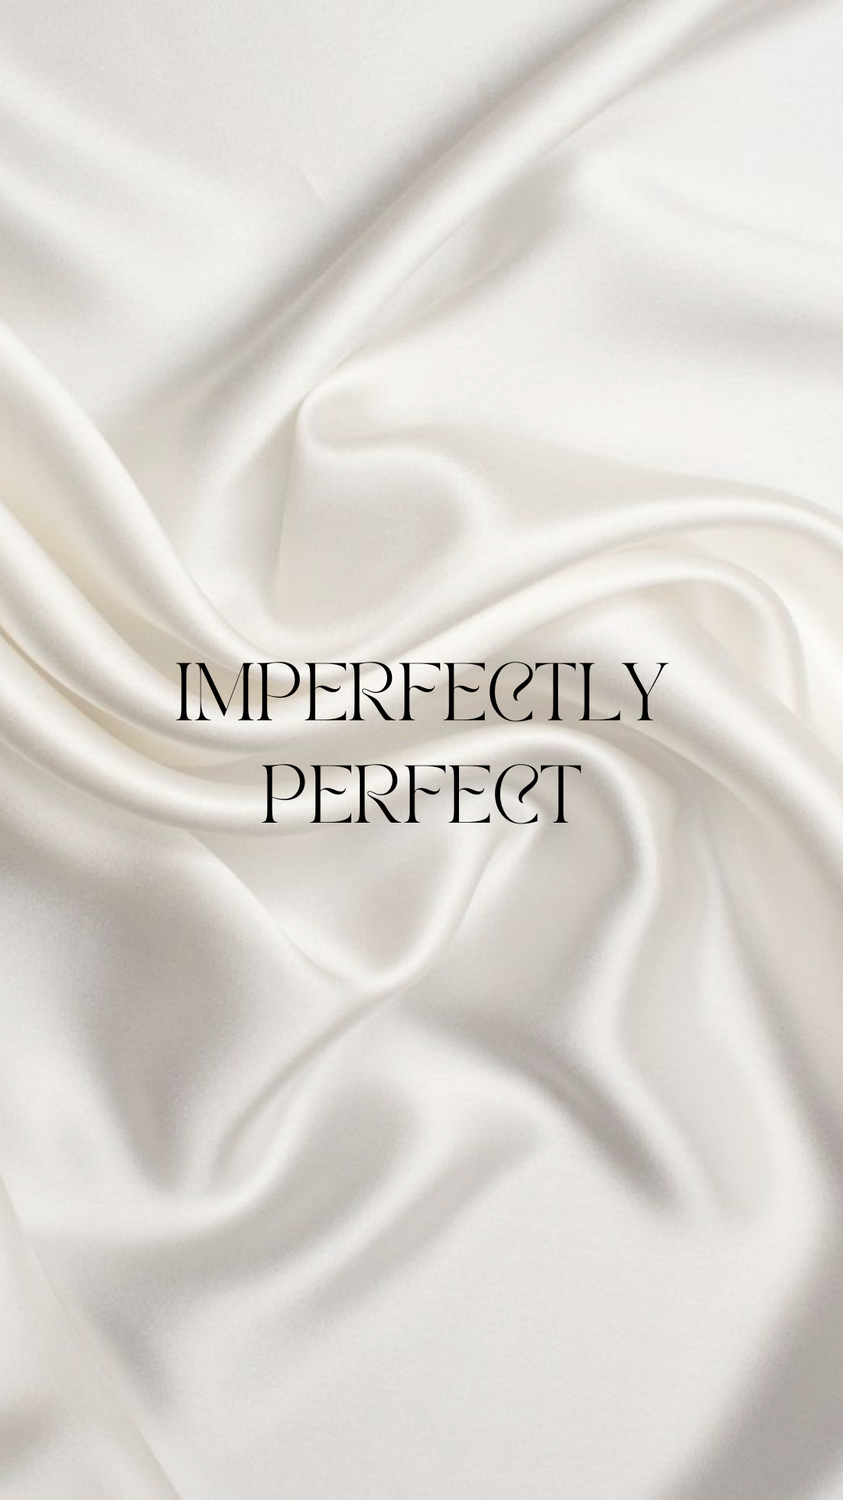 Imperfectly Perfect Phone Wallpaper